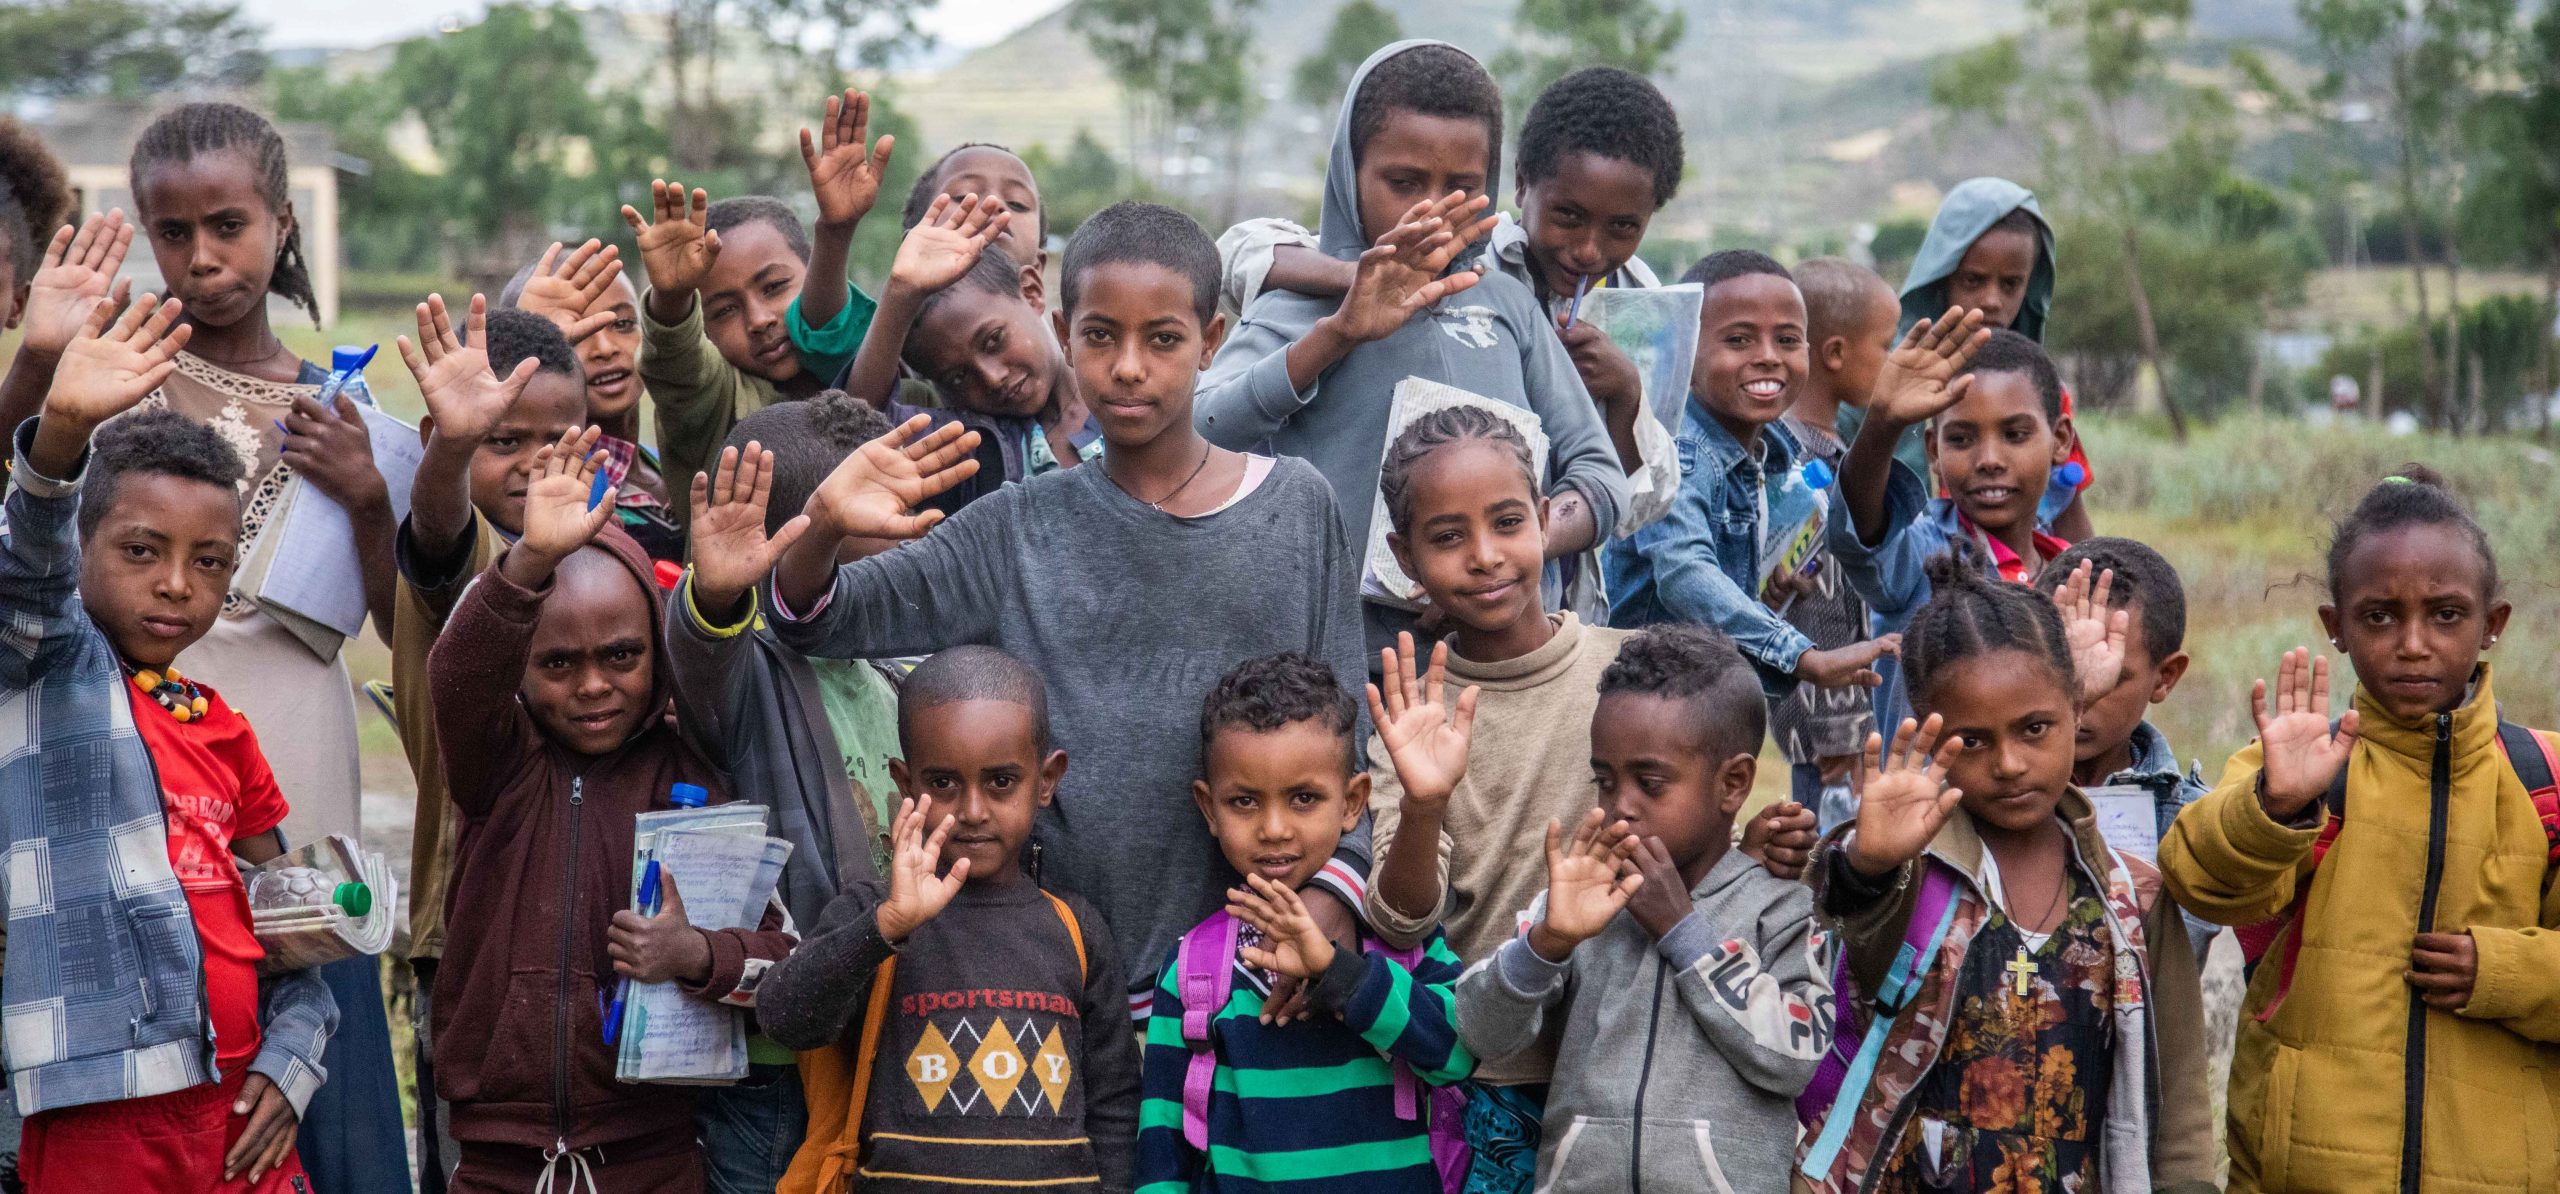 Ethiopia: 9.4 million people are ‘living their worst nightmare’ due to ongoing conflict